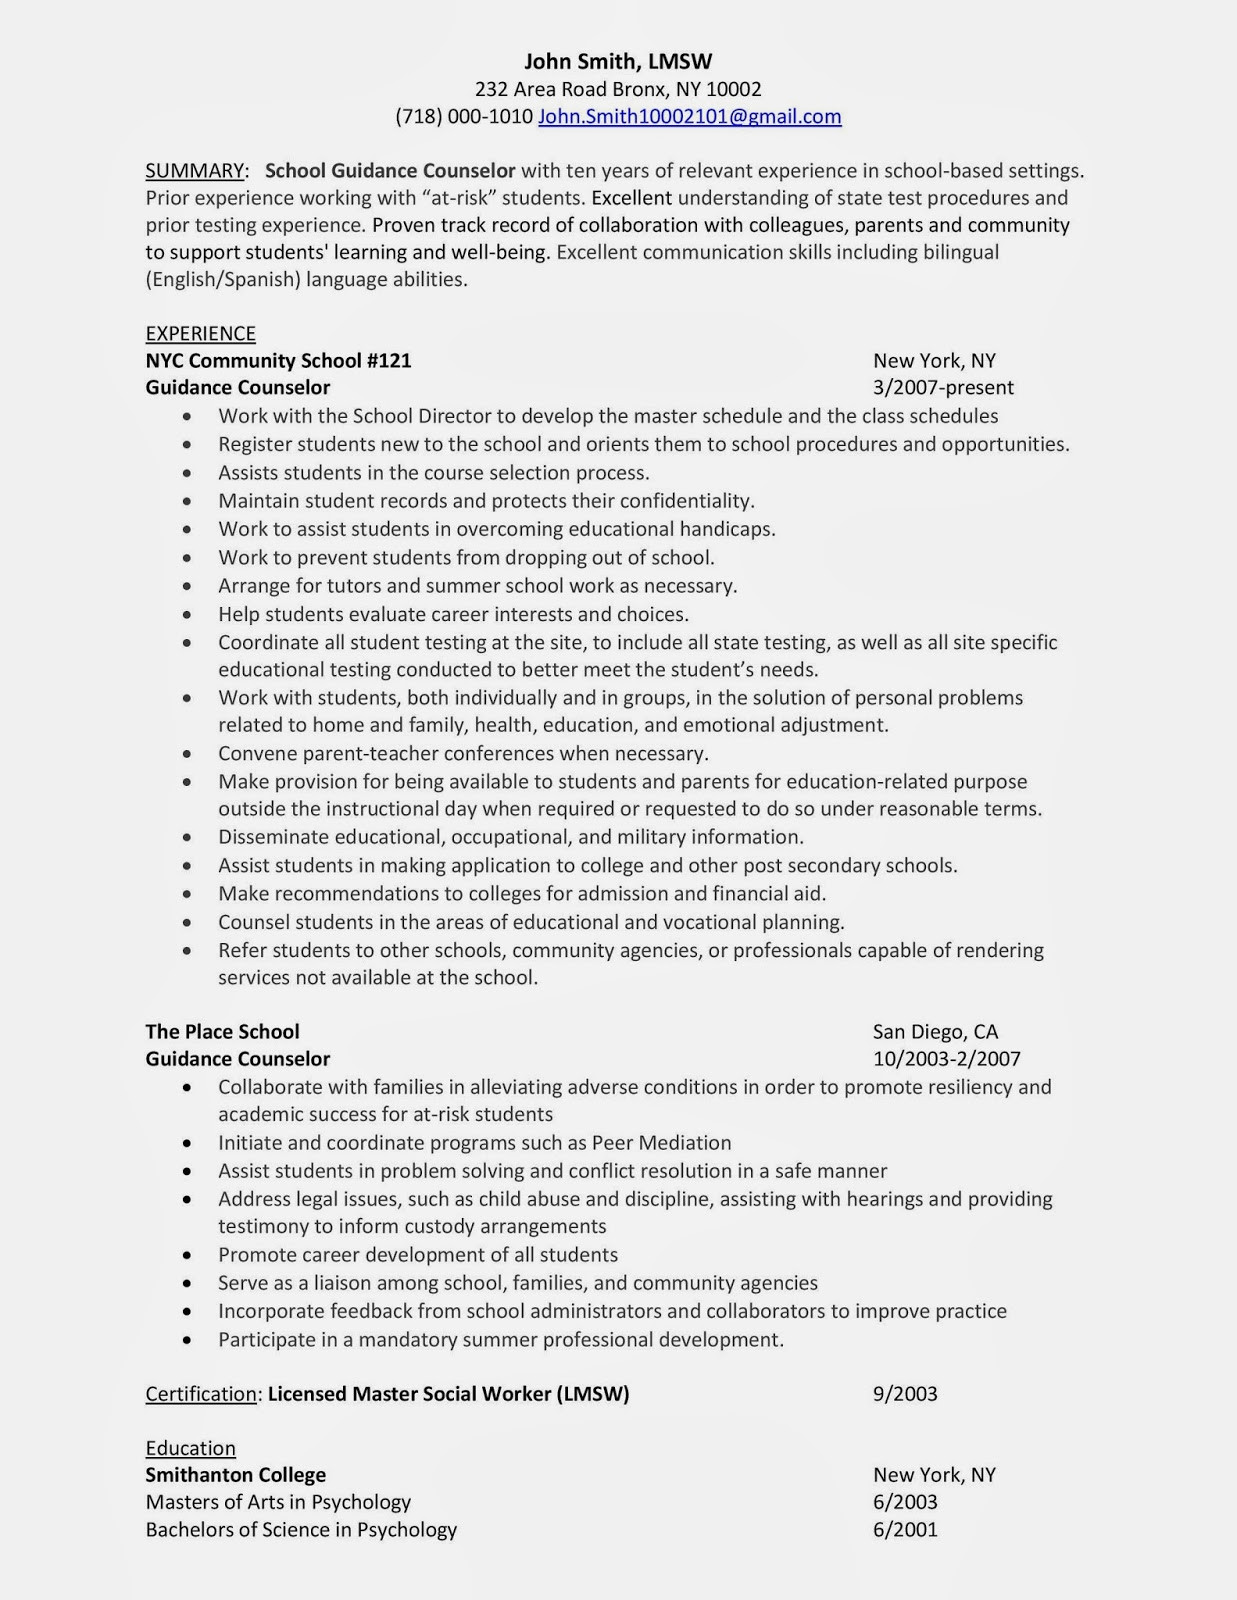 Sample Resume for Guidance Counselor Position Student Counsellor Resume Sample October 2021